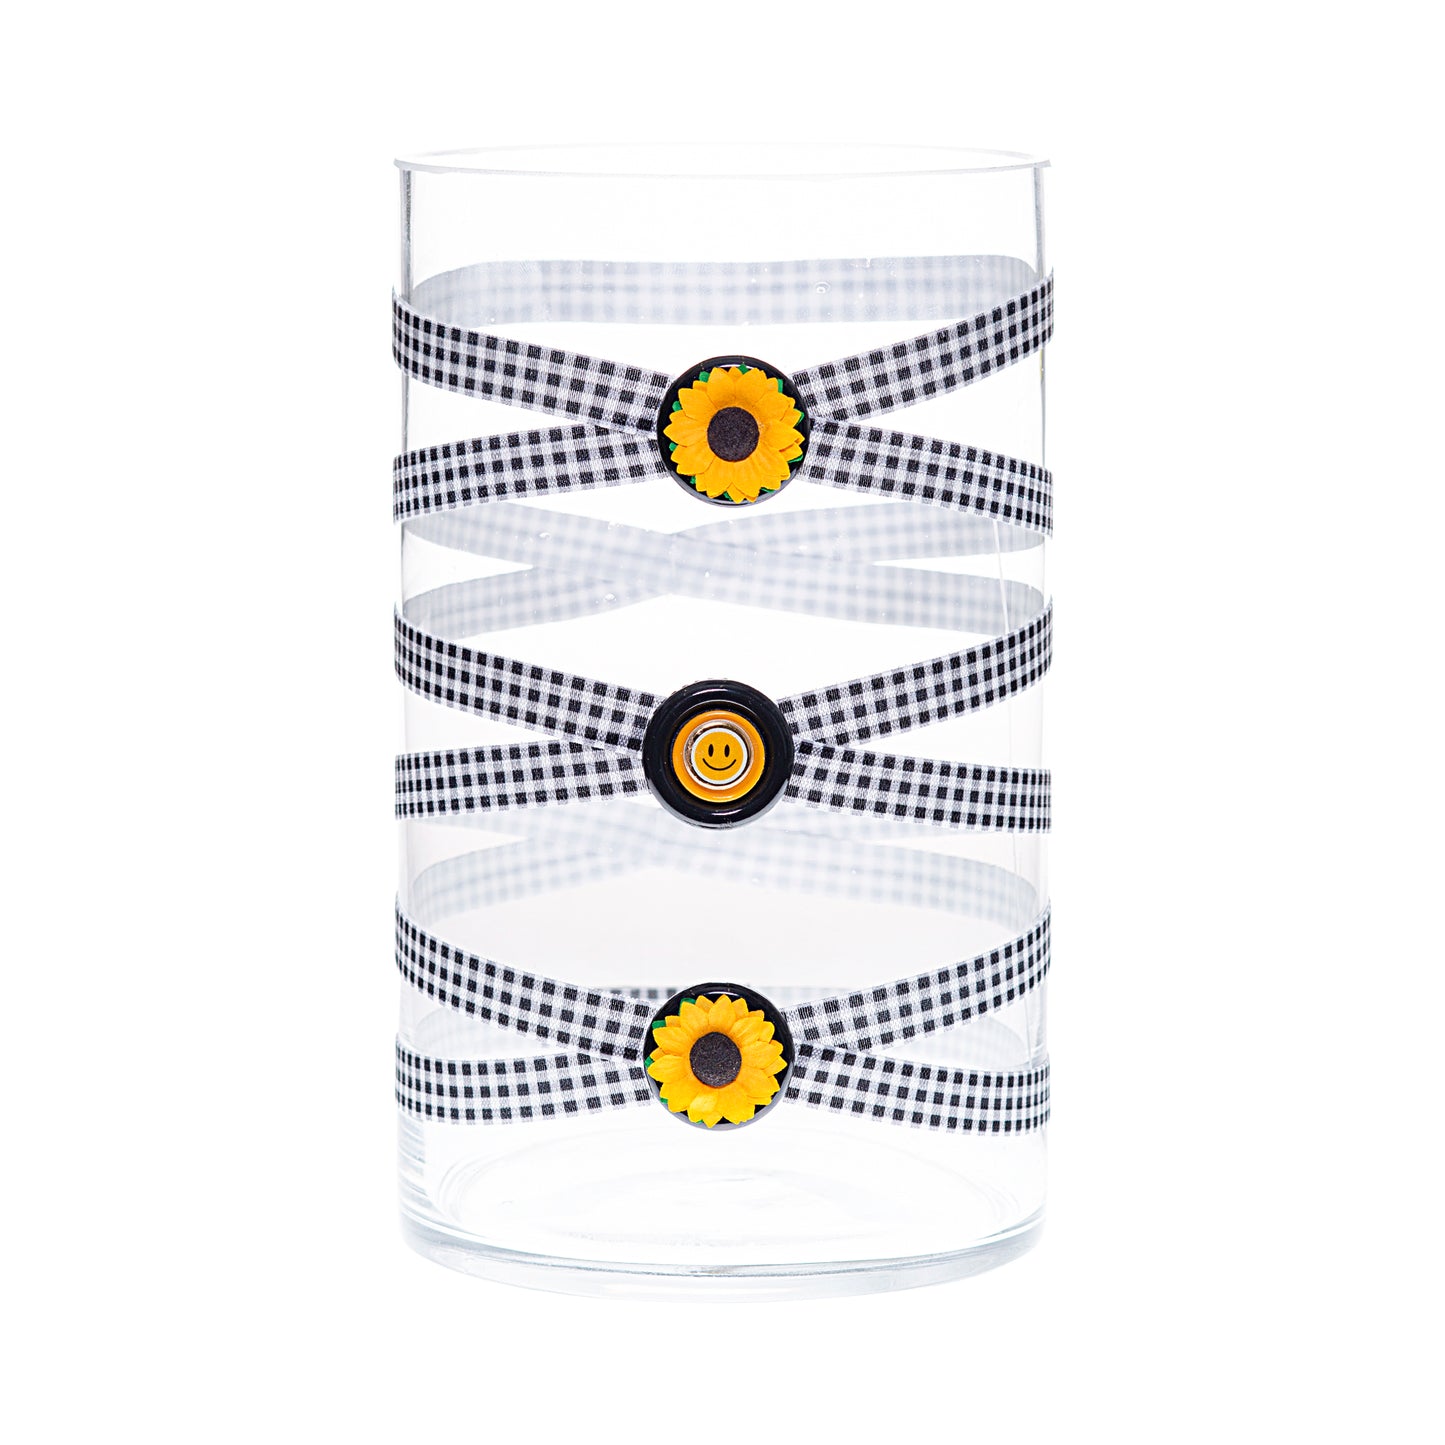 Front of Glass Wrappings 6" x 10" cylinder wrapped in black and white check elastic, decorated with  sunflowers and a yellow smiley face.